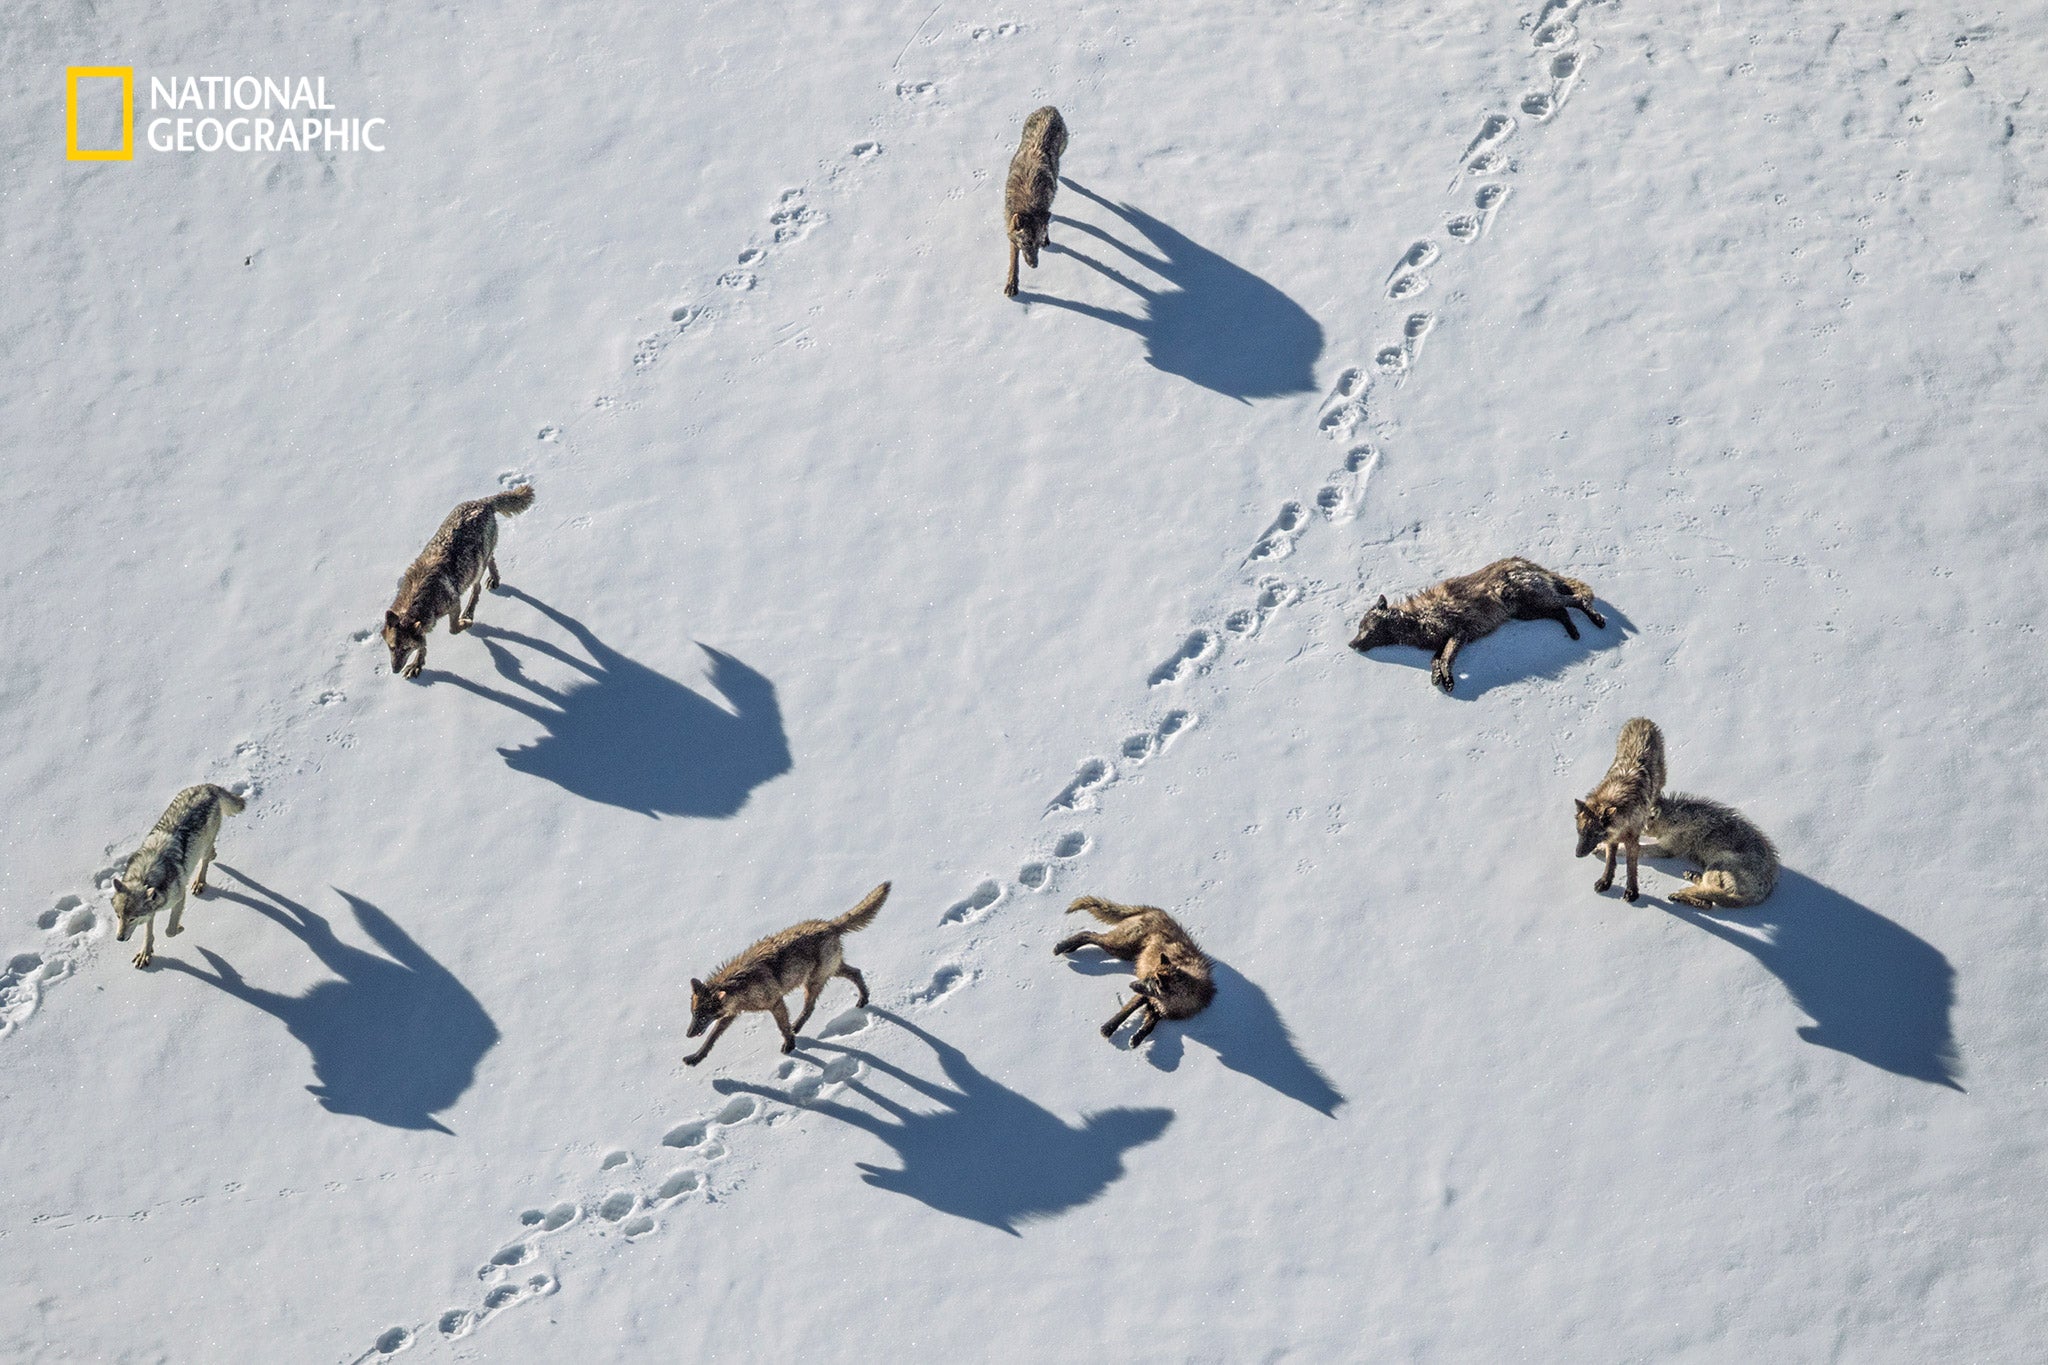 Gray wolves investigate grizzly bear tracks in Yellowstone’s Pelican Valley. Once an endangered species, the wolves were reintroduced into the area in the mid ‘90s, by the end of 2021 95 live in the park. 